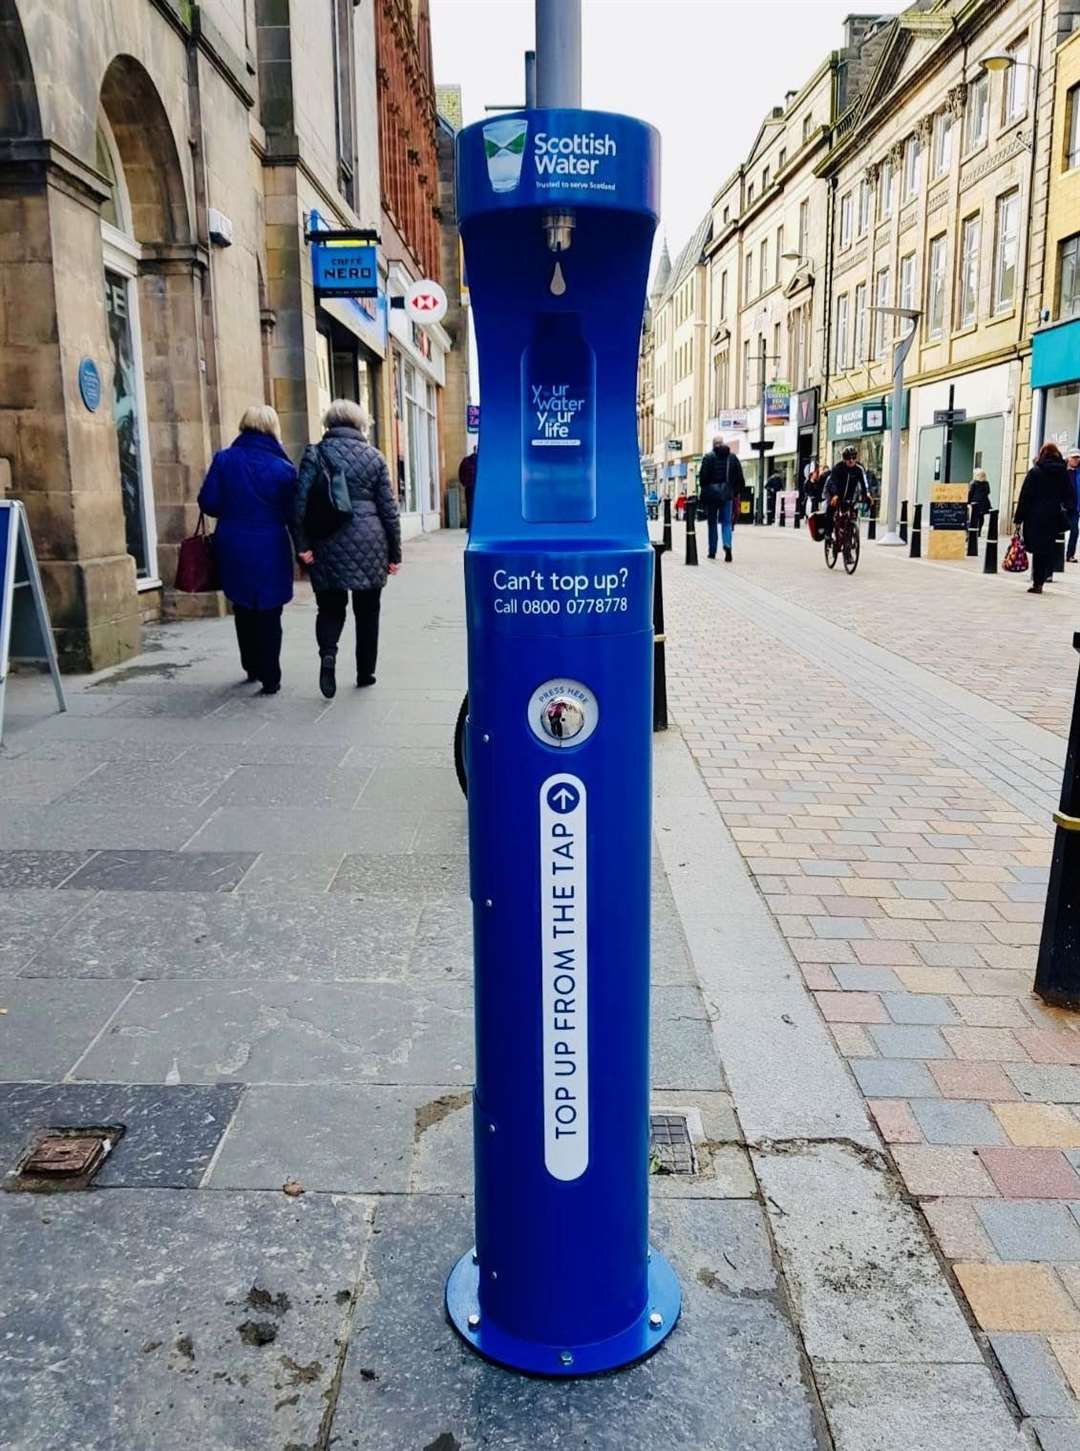 One of the Top Up Taps which is in Inverness High Street.